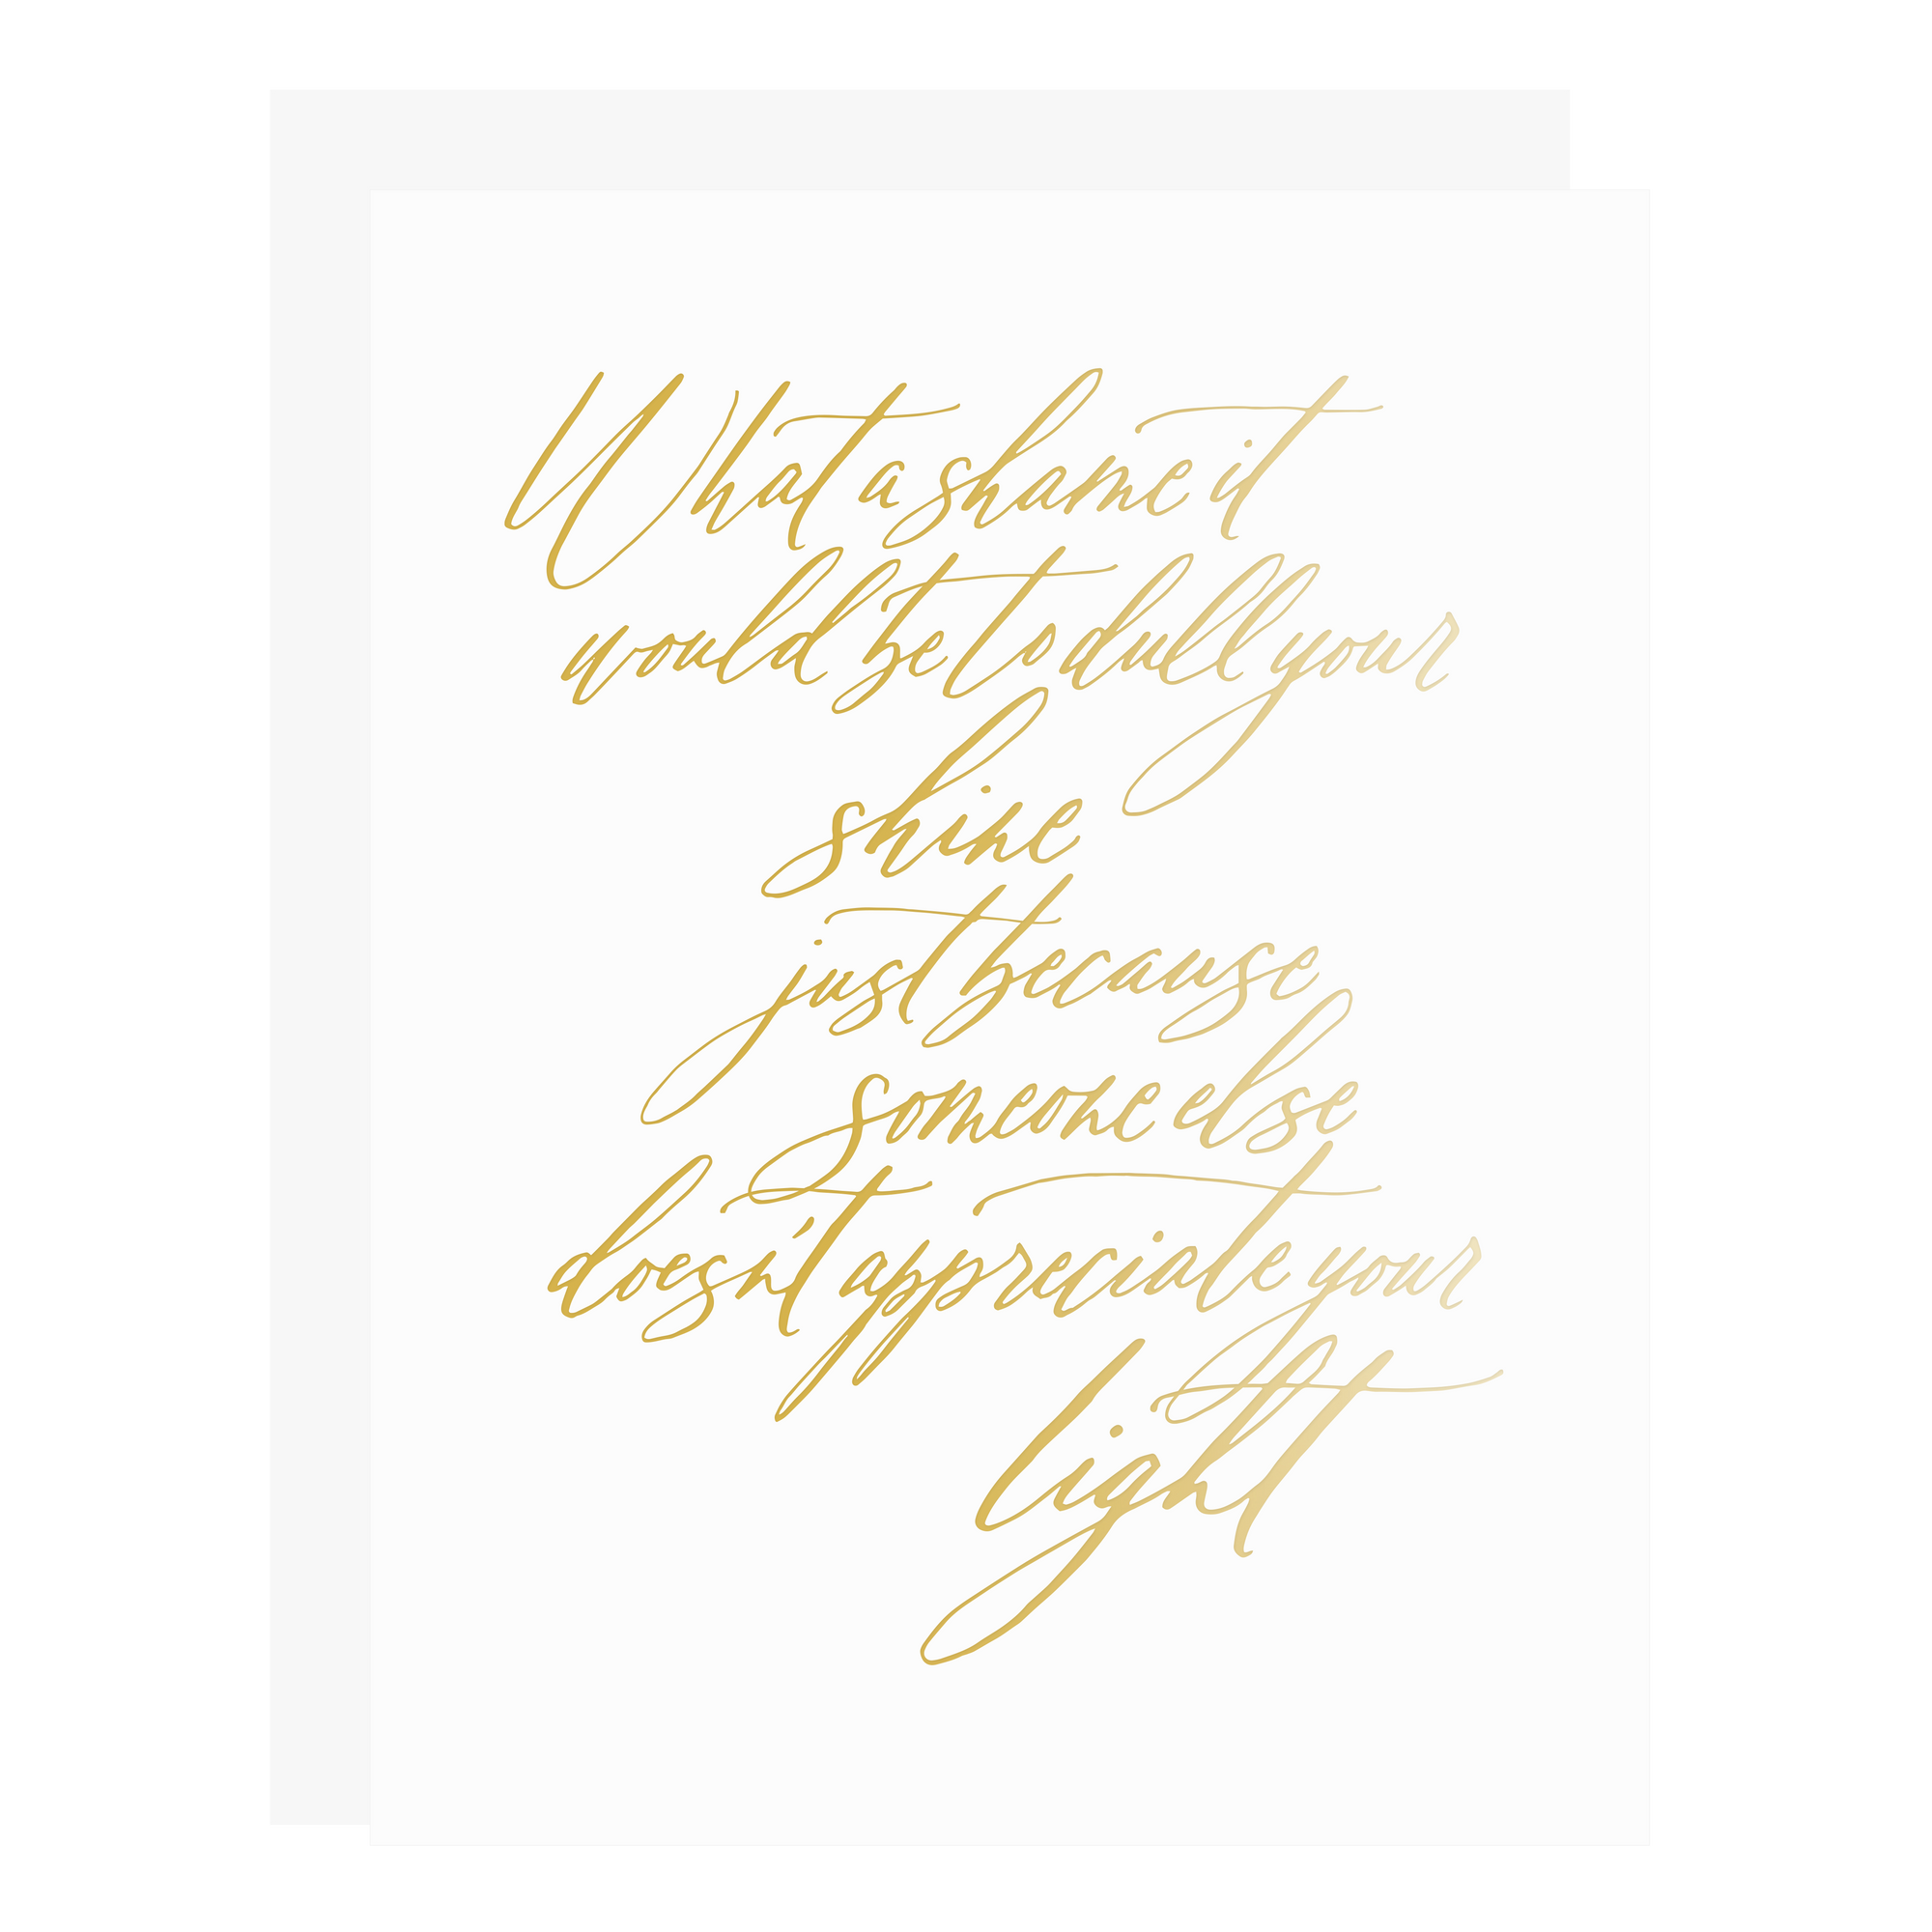 Appreciate Your Light card, letterpress printed by hand with gold foil